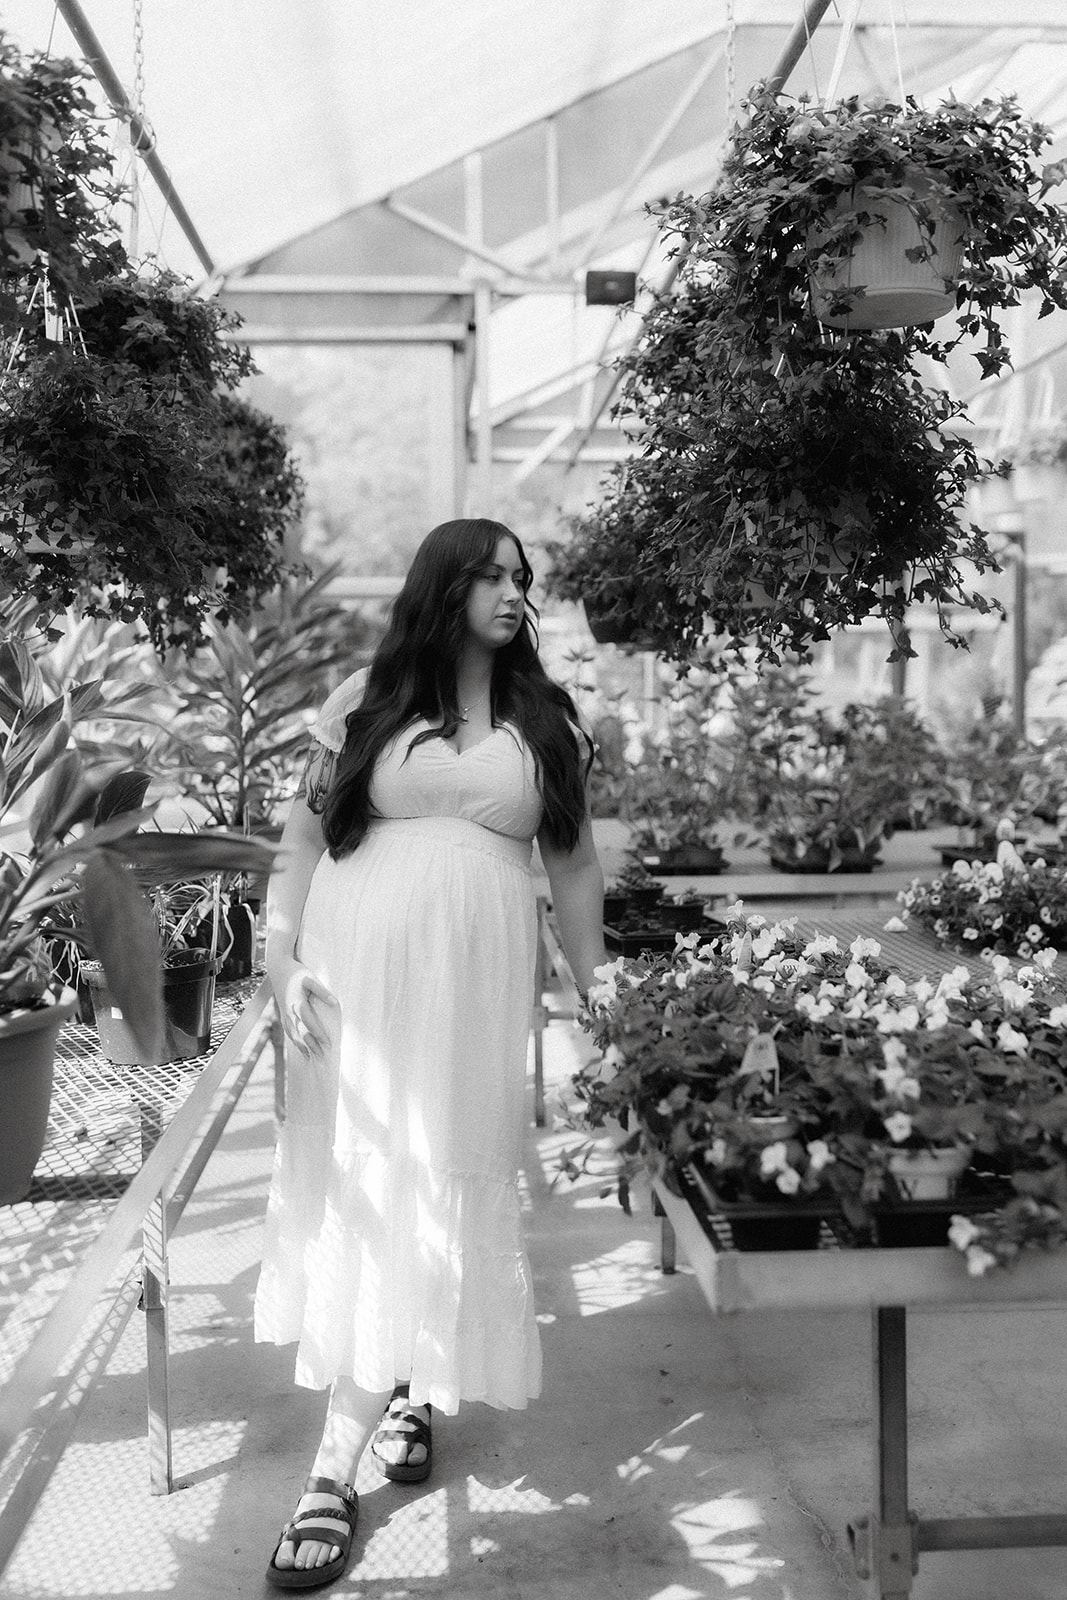 Stunning soon to be mother poses with flowers during her unique maternity shoot